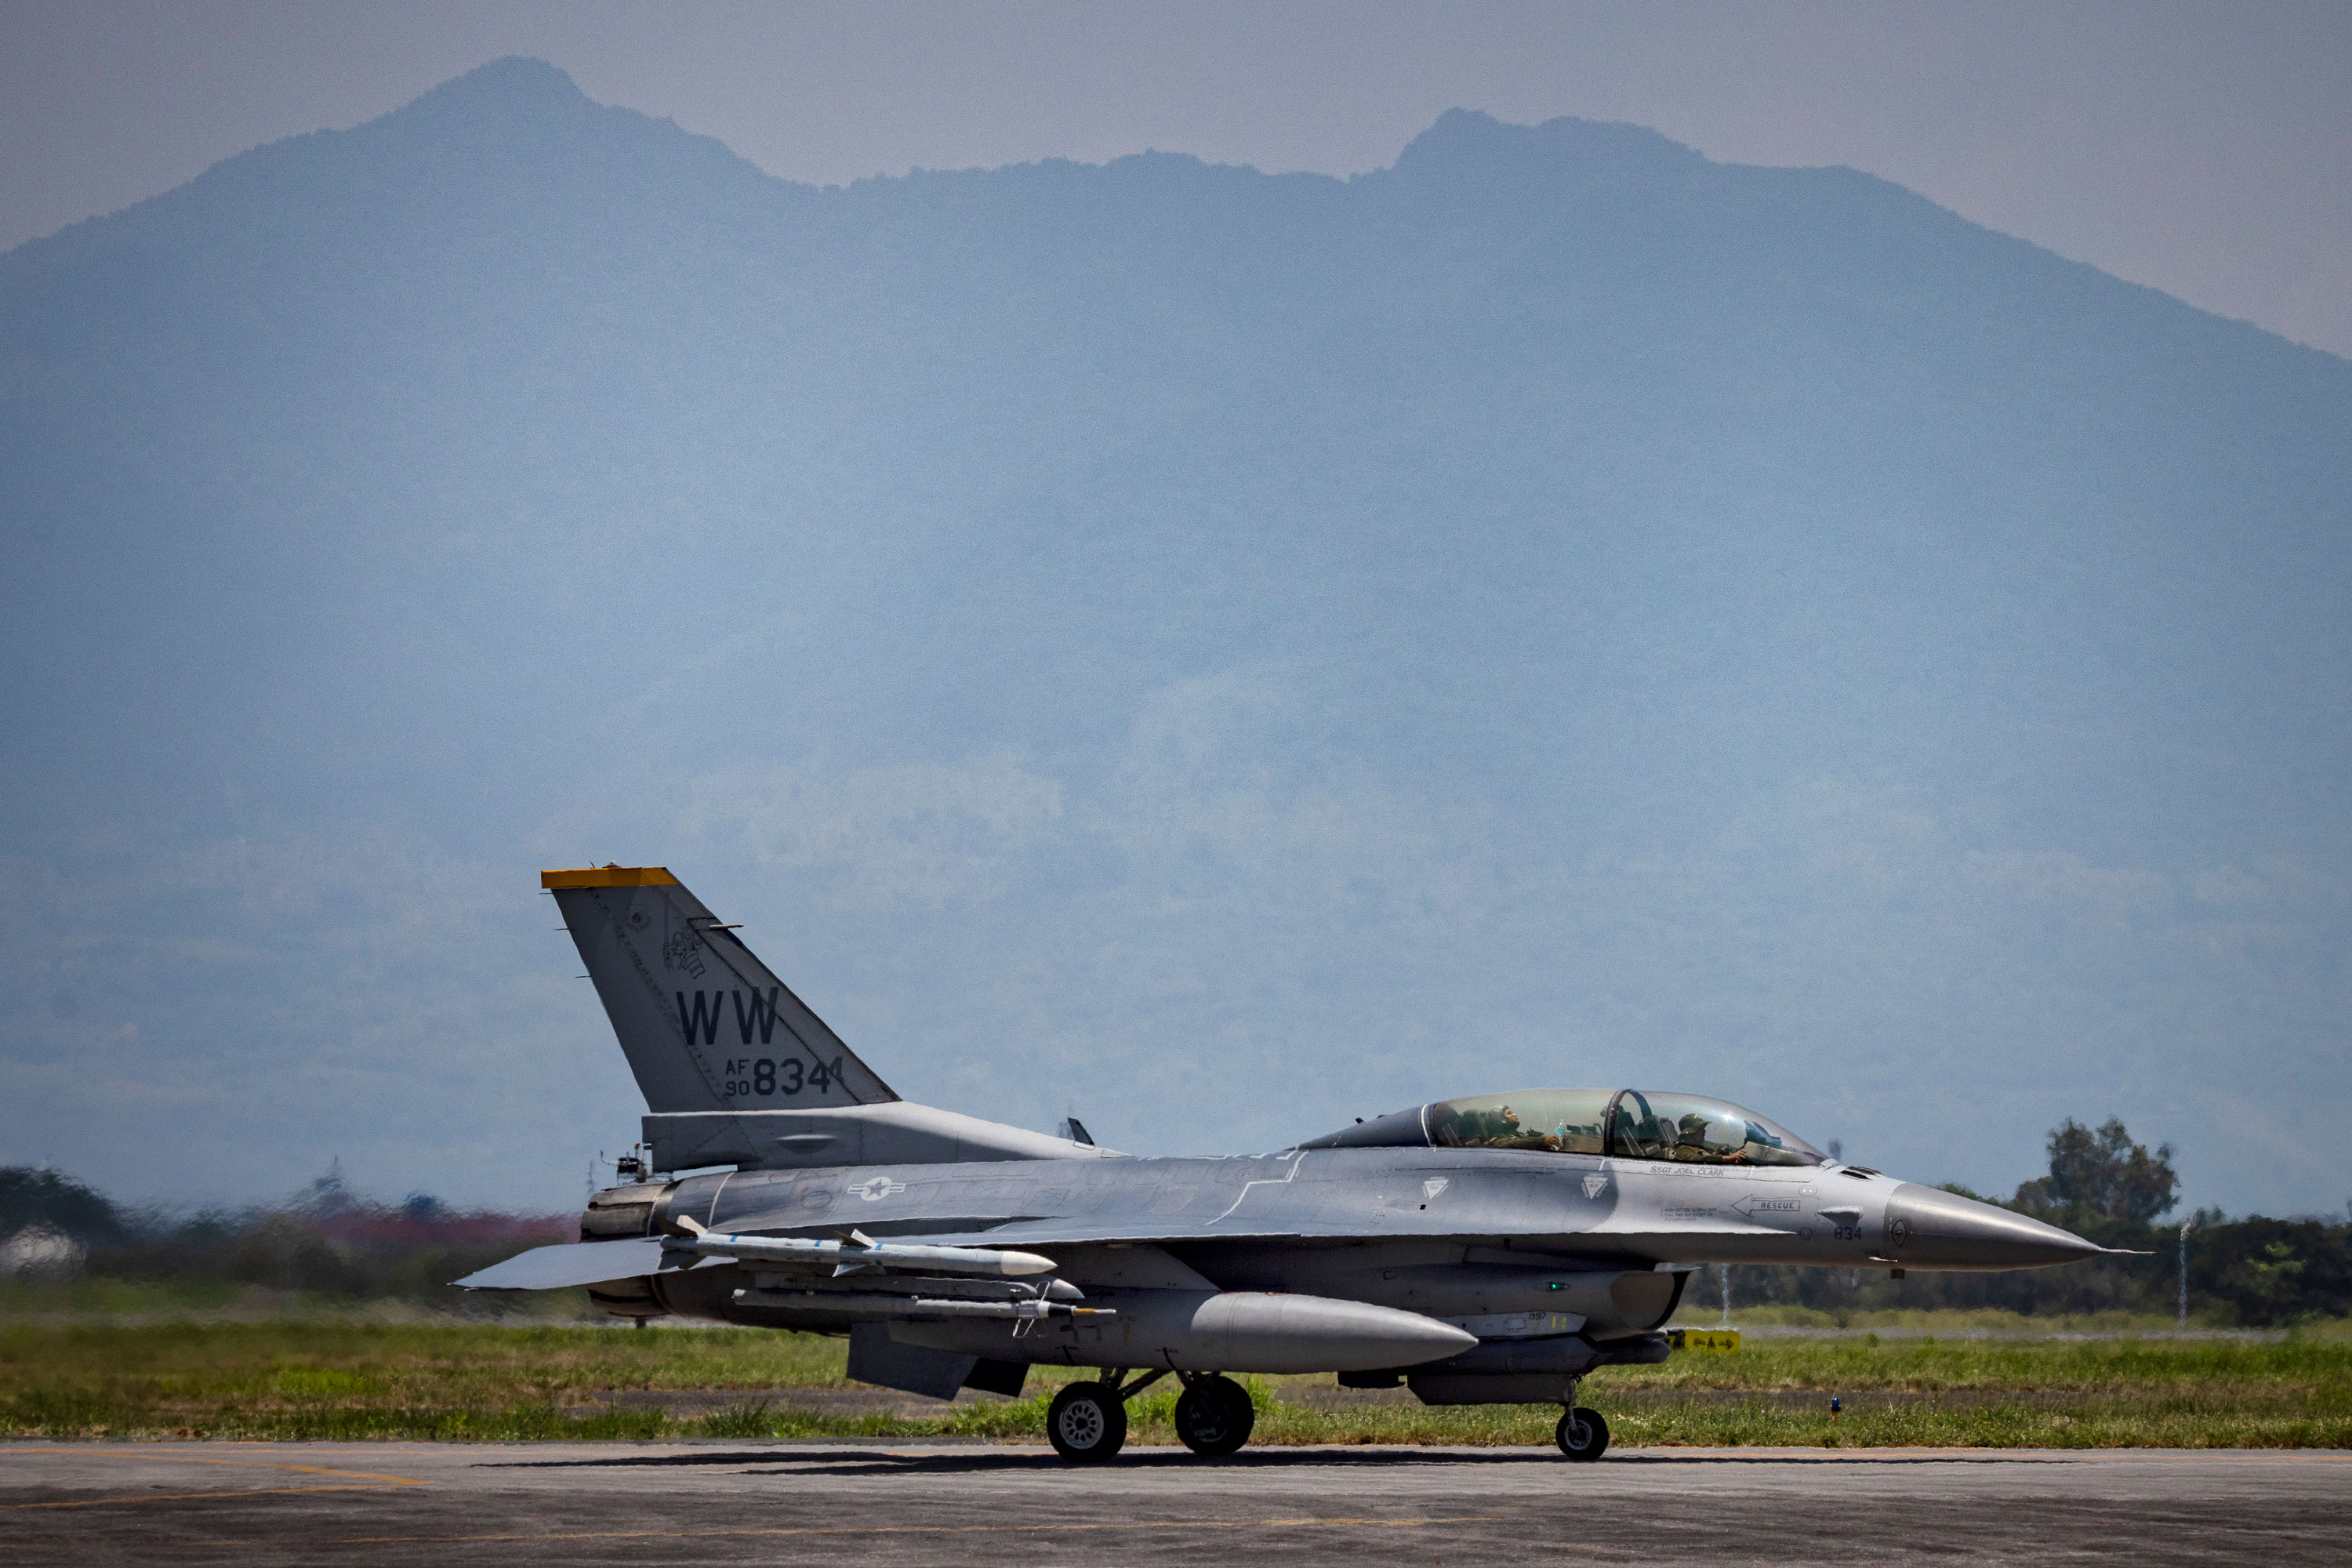 A U.S. Air Force F16 taxis on the runway during U.S.-Philippines joint air force exercises dubbed Cope Thunder at Clark Air Base on May 09, 2023 in Mabalacat, Pampanga province, Philippines.